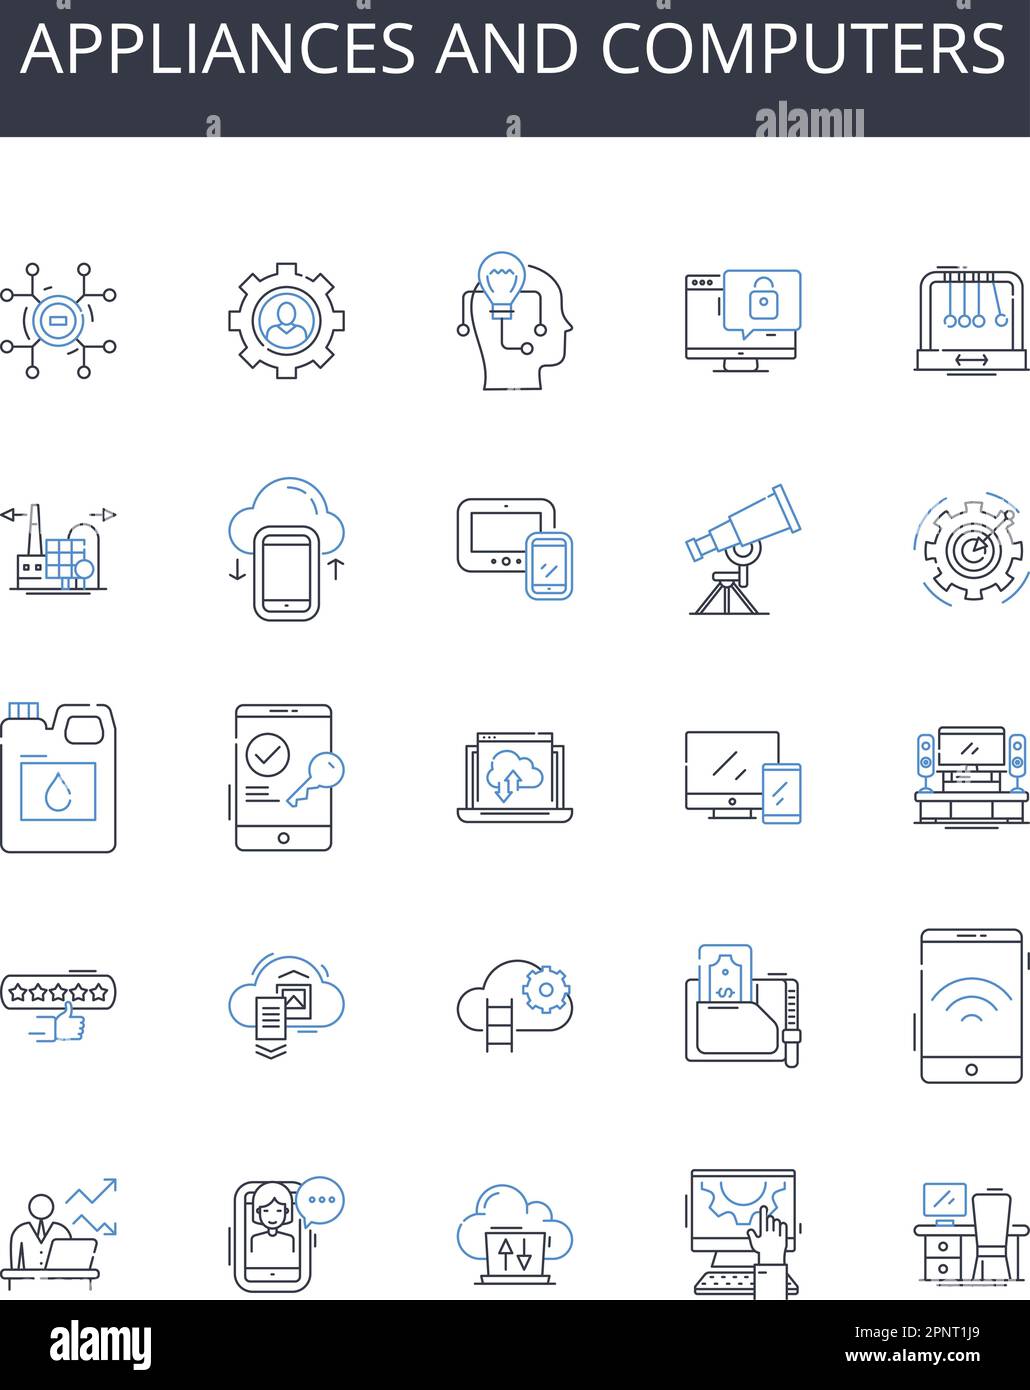 Appliances and computers line icons collection. Devices, Gadgets, Machines, Electrics, Tech, Equipment, Tools vector and linear illustration Stock Vector